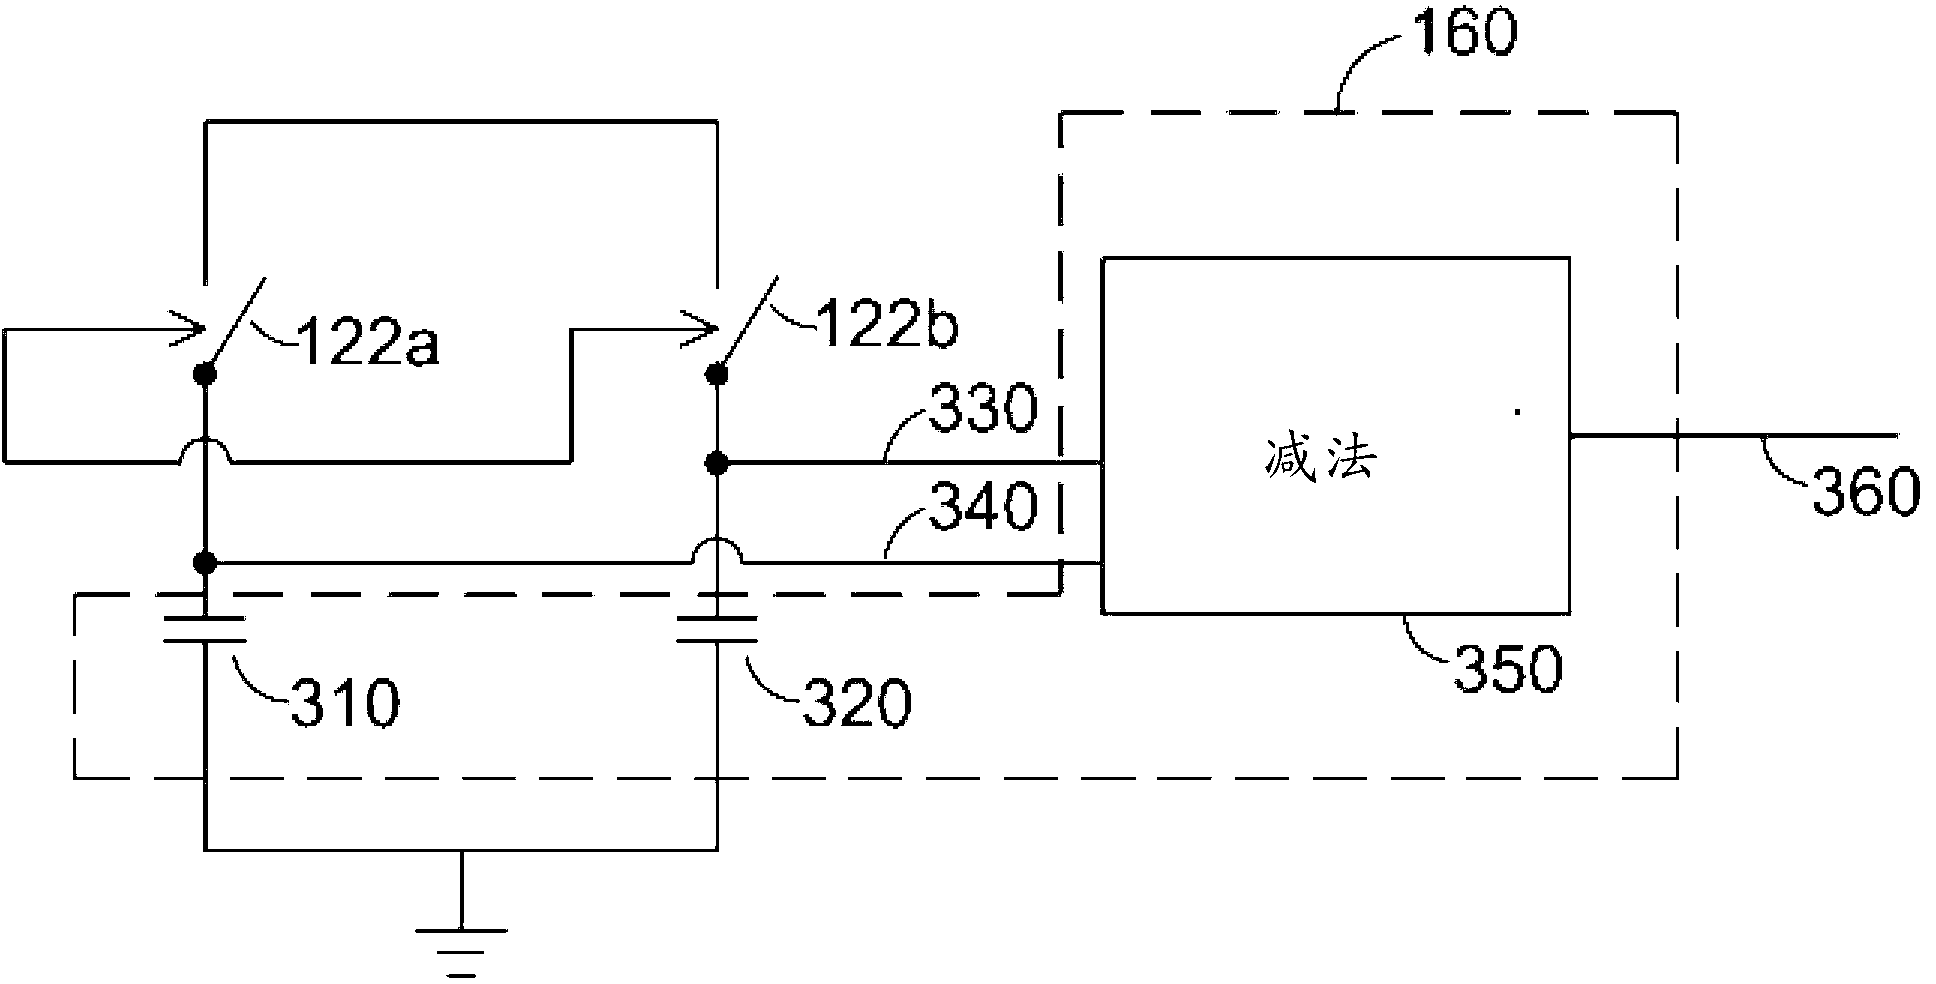 Small area high performance cell-based thermal diode